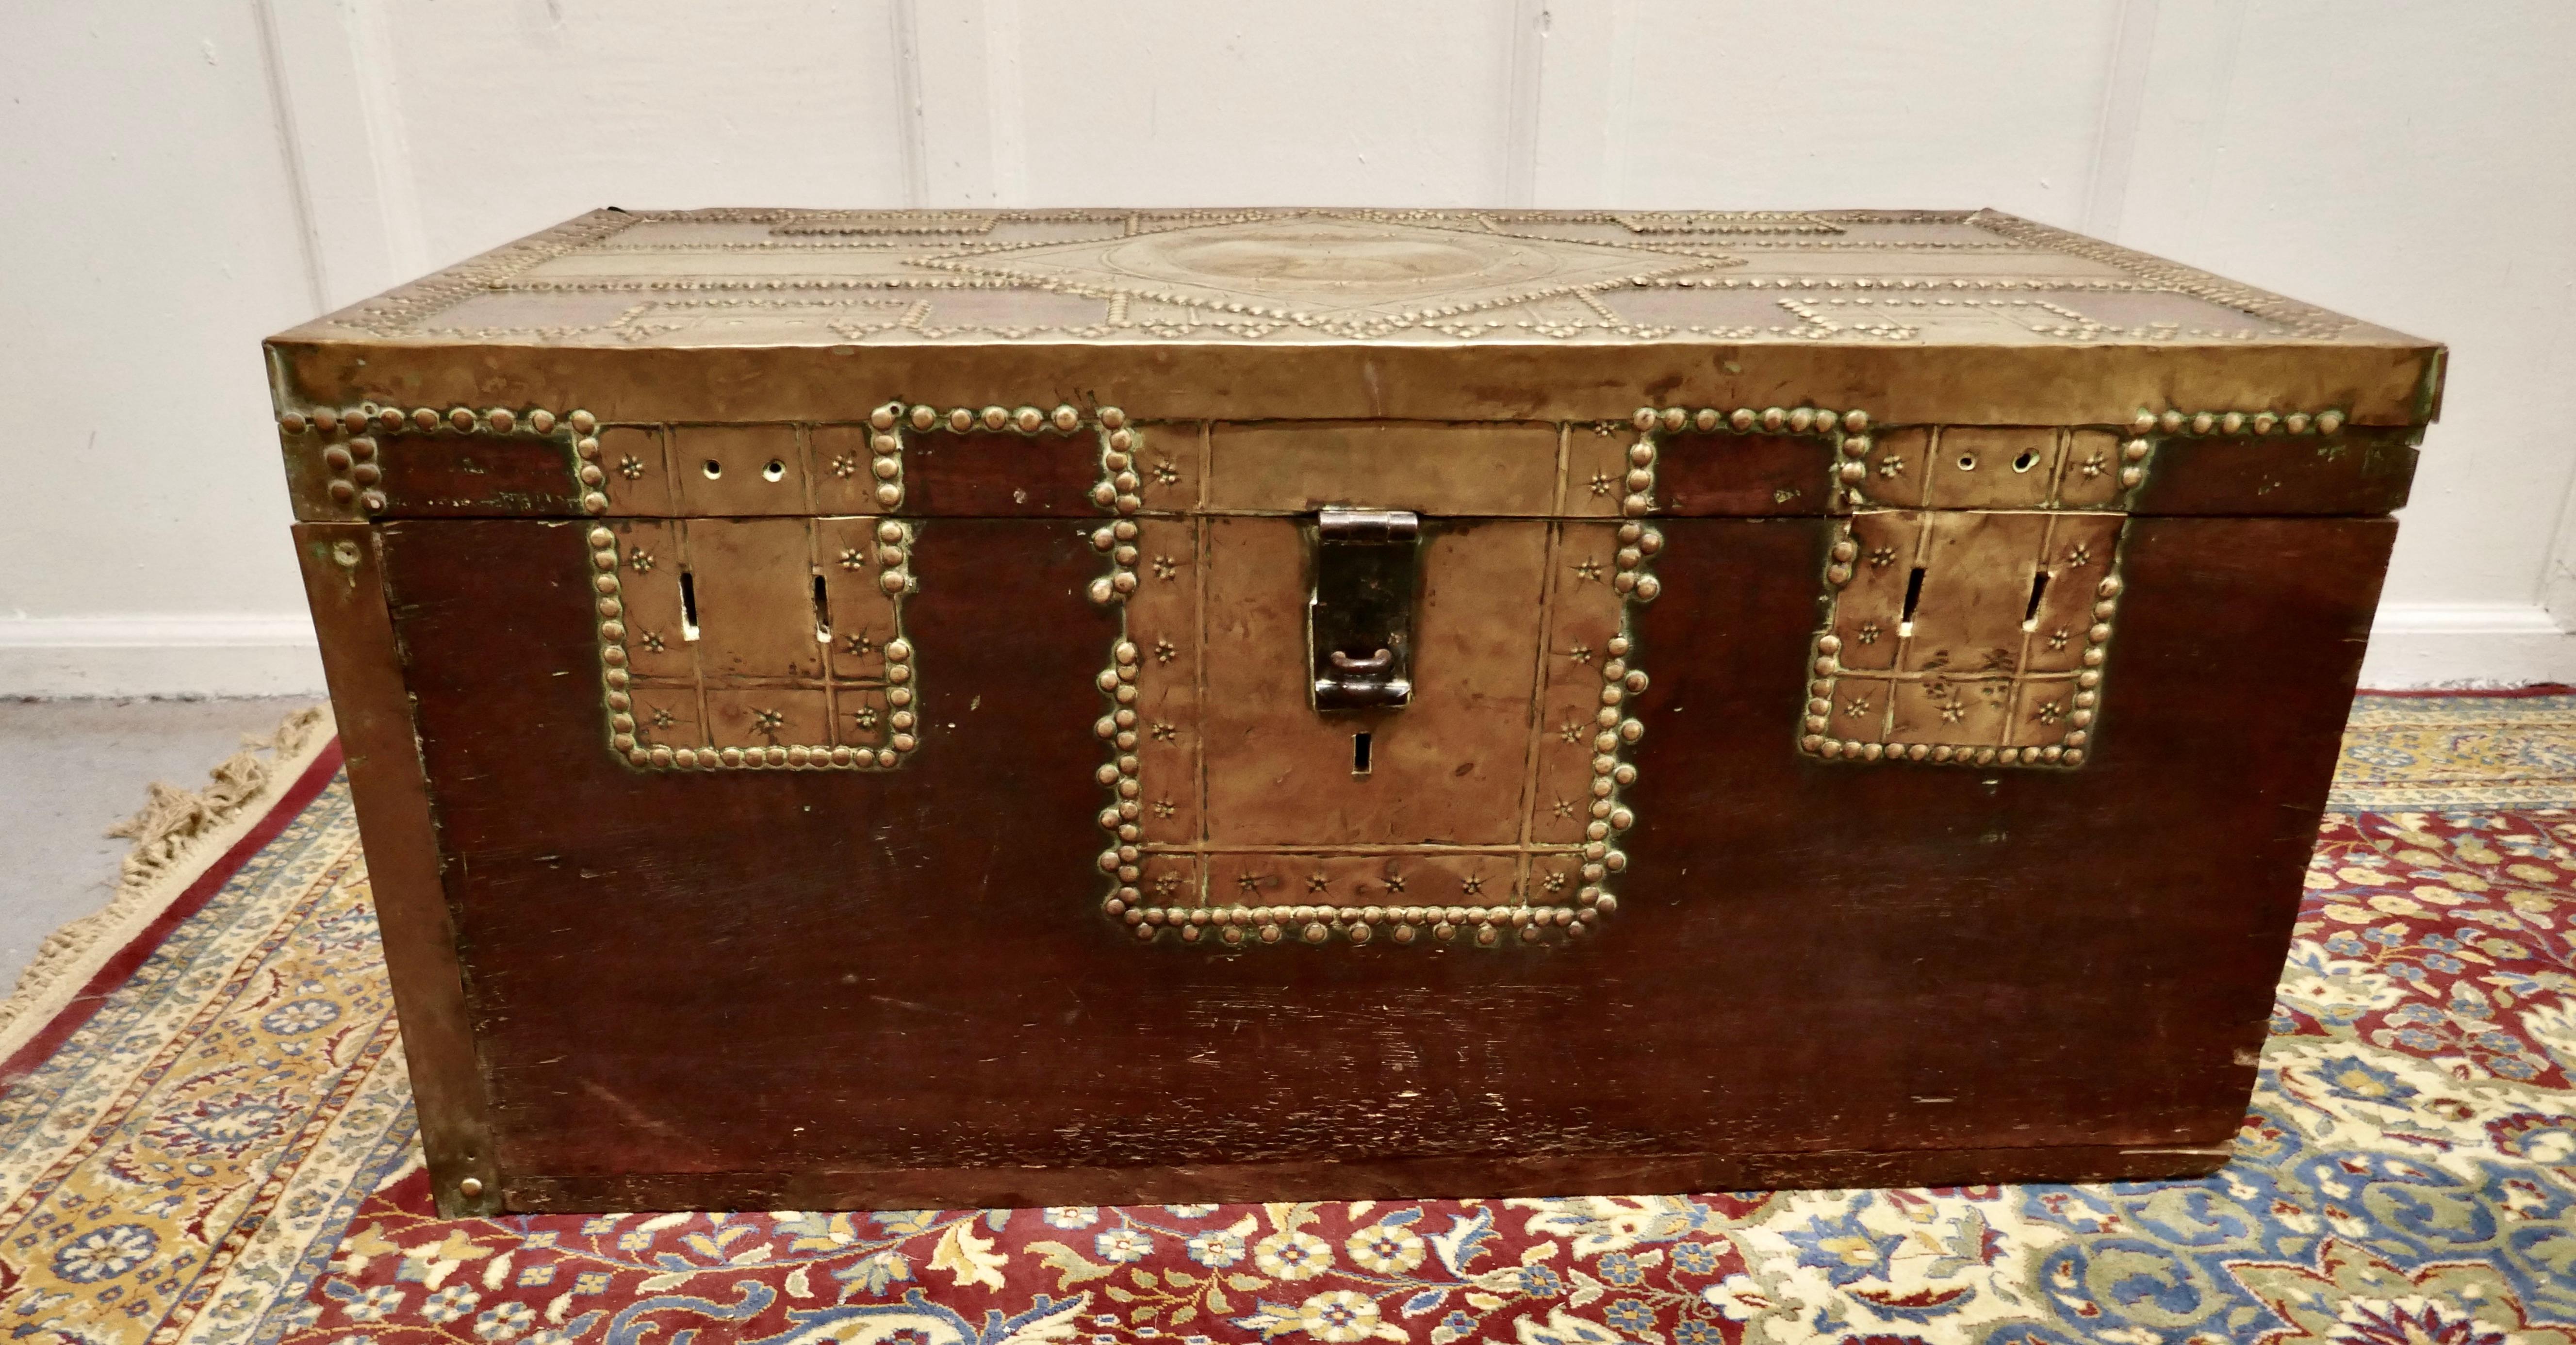 A 19th Century Zanzibar trunk

A superb piece showing the wonderful craftsmanship of the brass workers 
This hardwood chest is decorated with brass, studs and fretwork
Dowry chests like this were often used in the export of spices, rugs, and